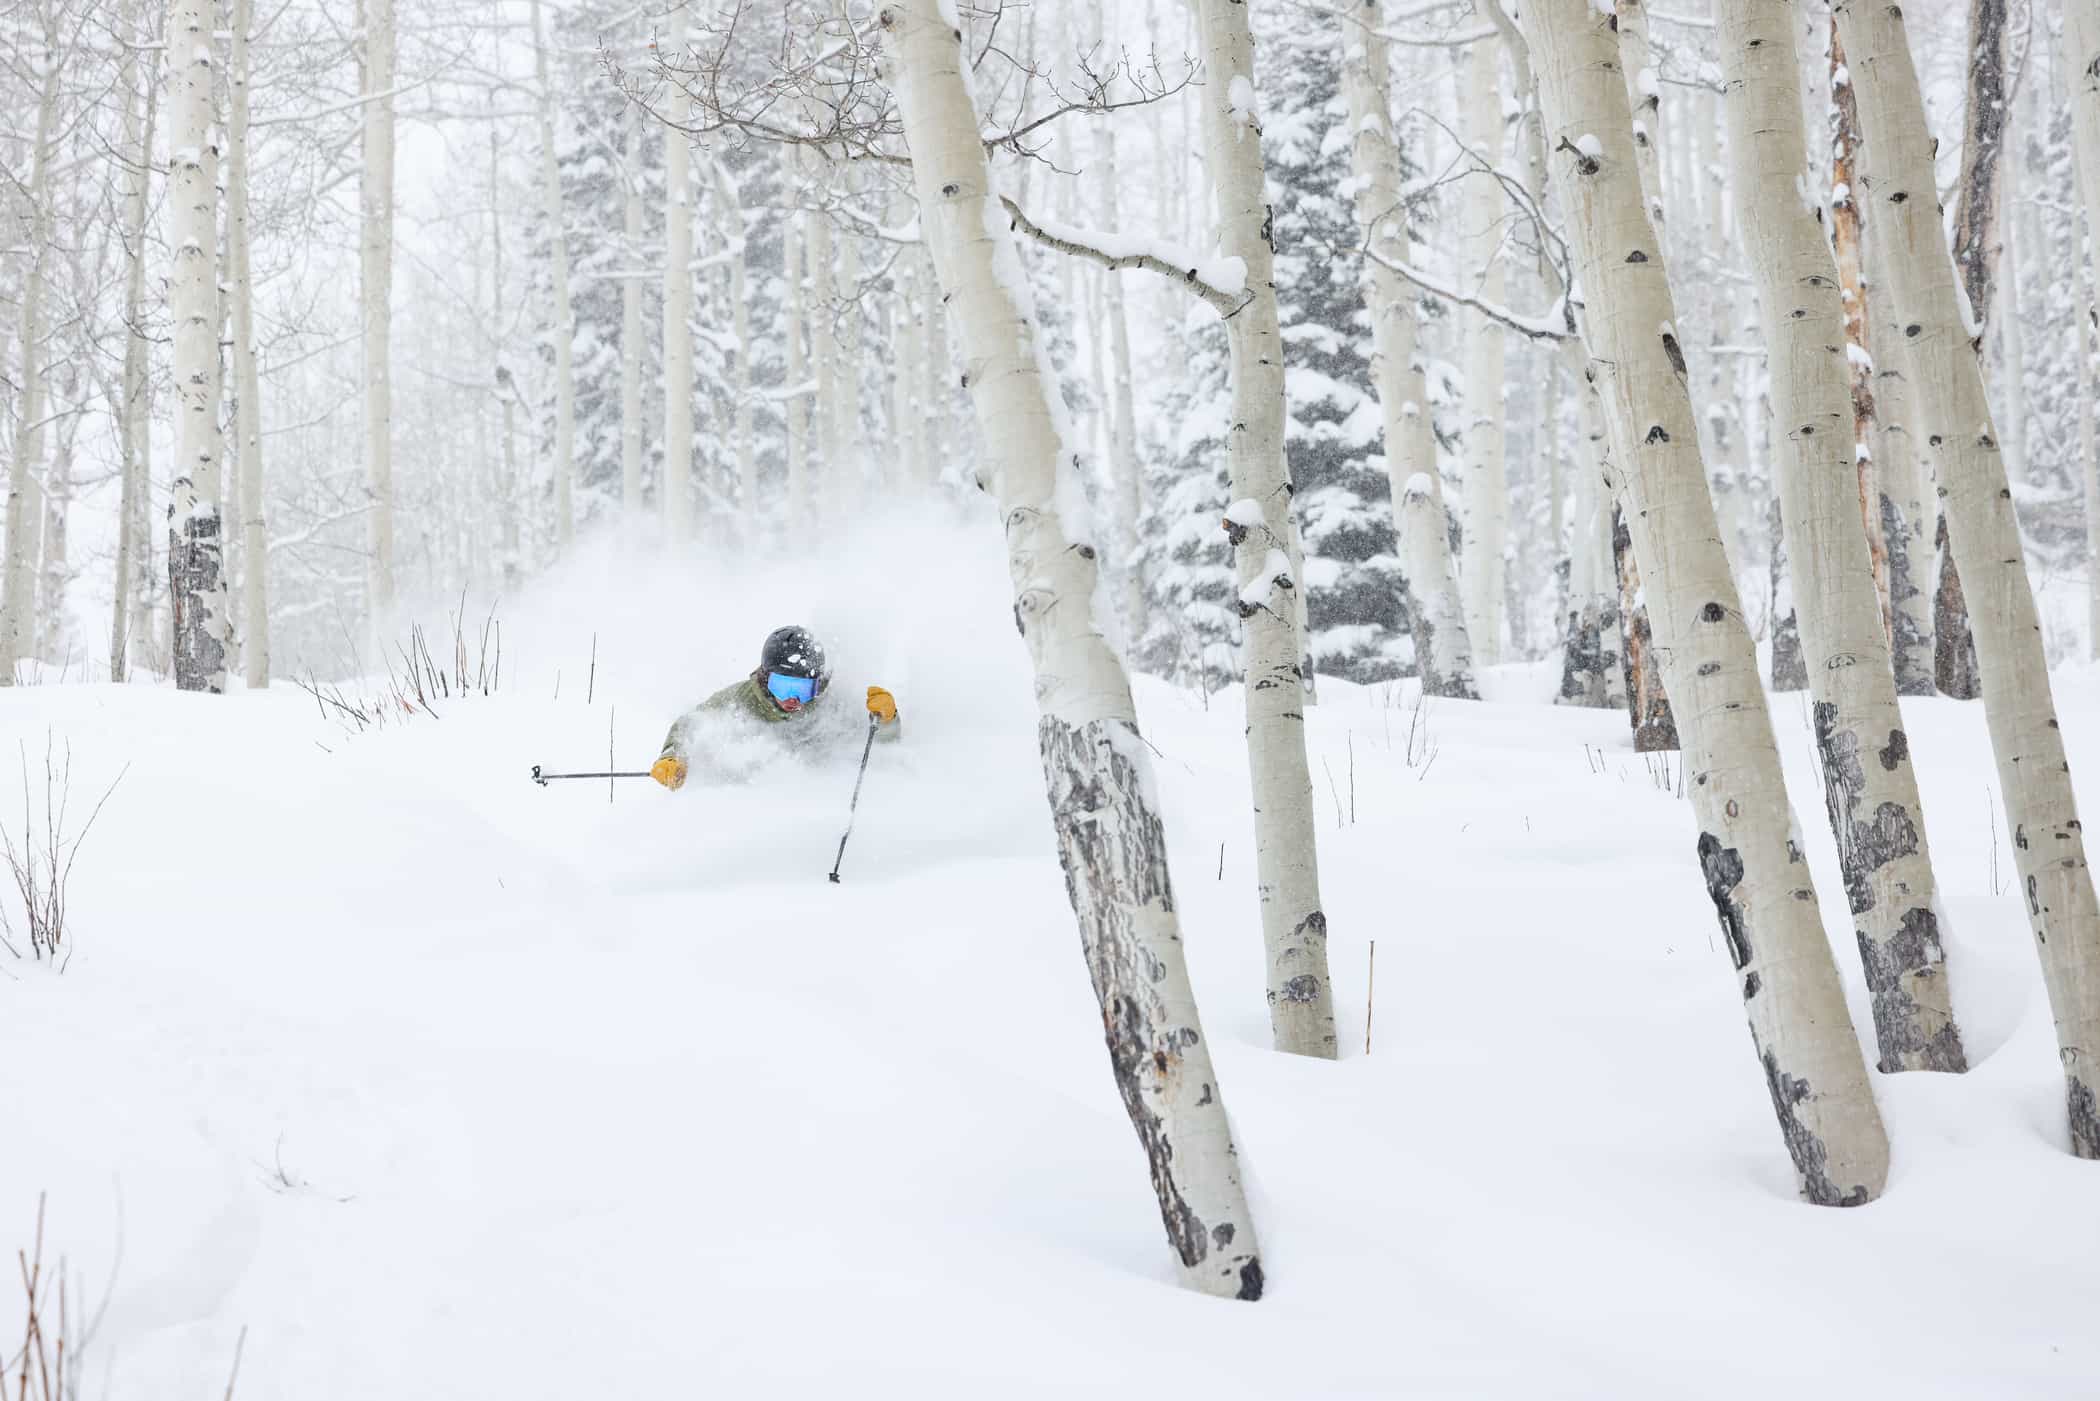 skier in fresh deep powder snow in the trees at Crested Butte Colorado